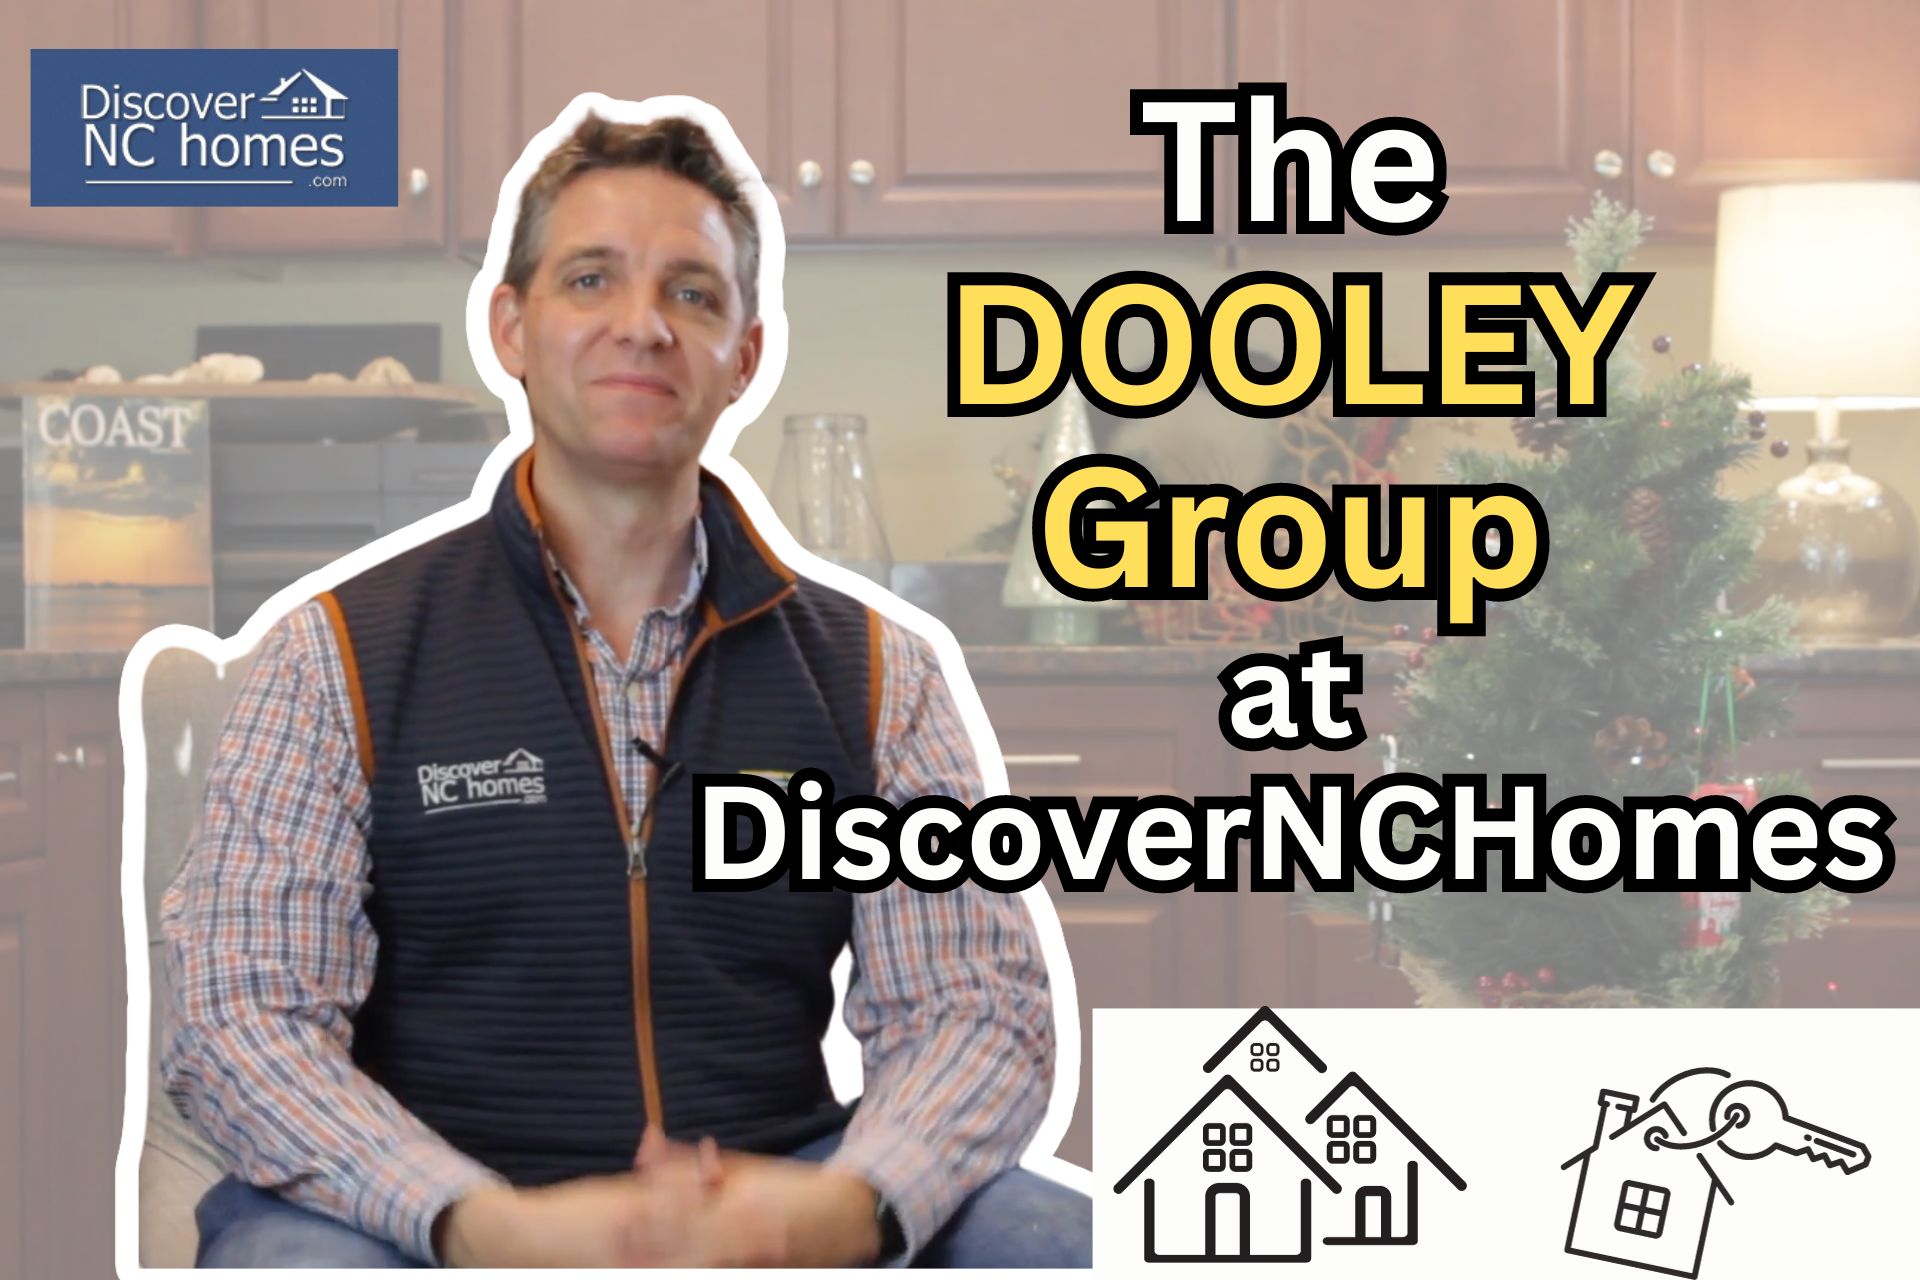 The Dooley Group Intro